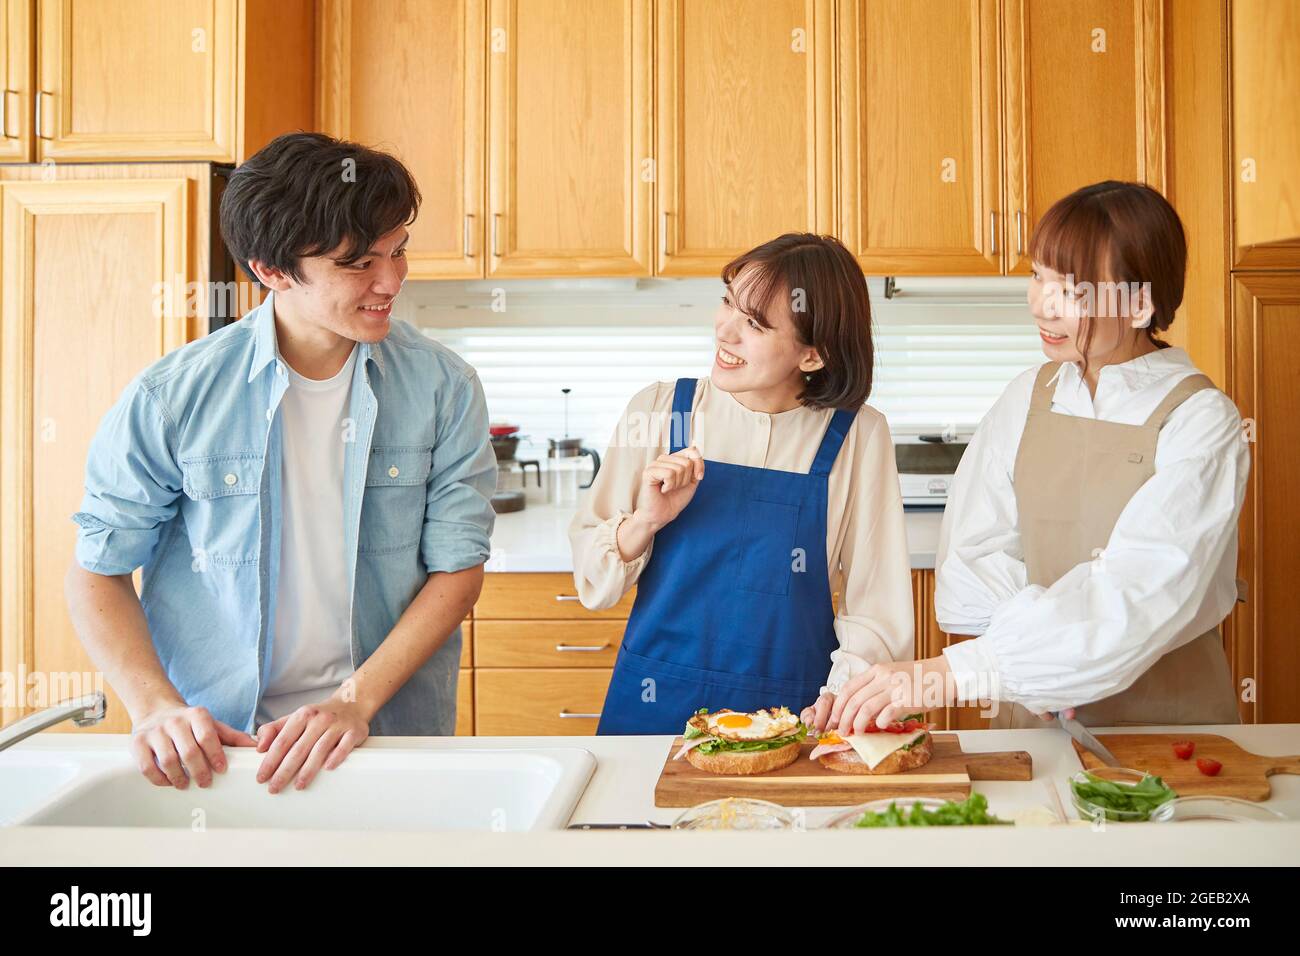 Japanese friends cooking at home Stock Photo